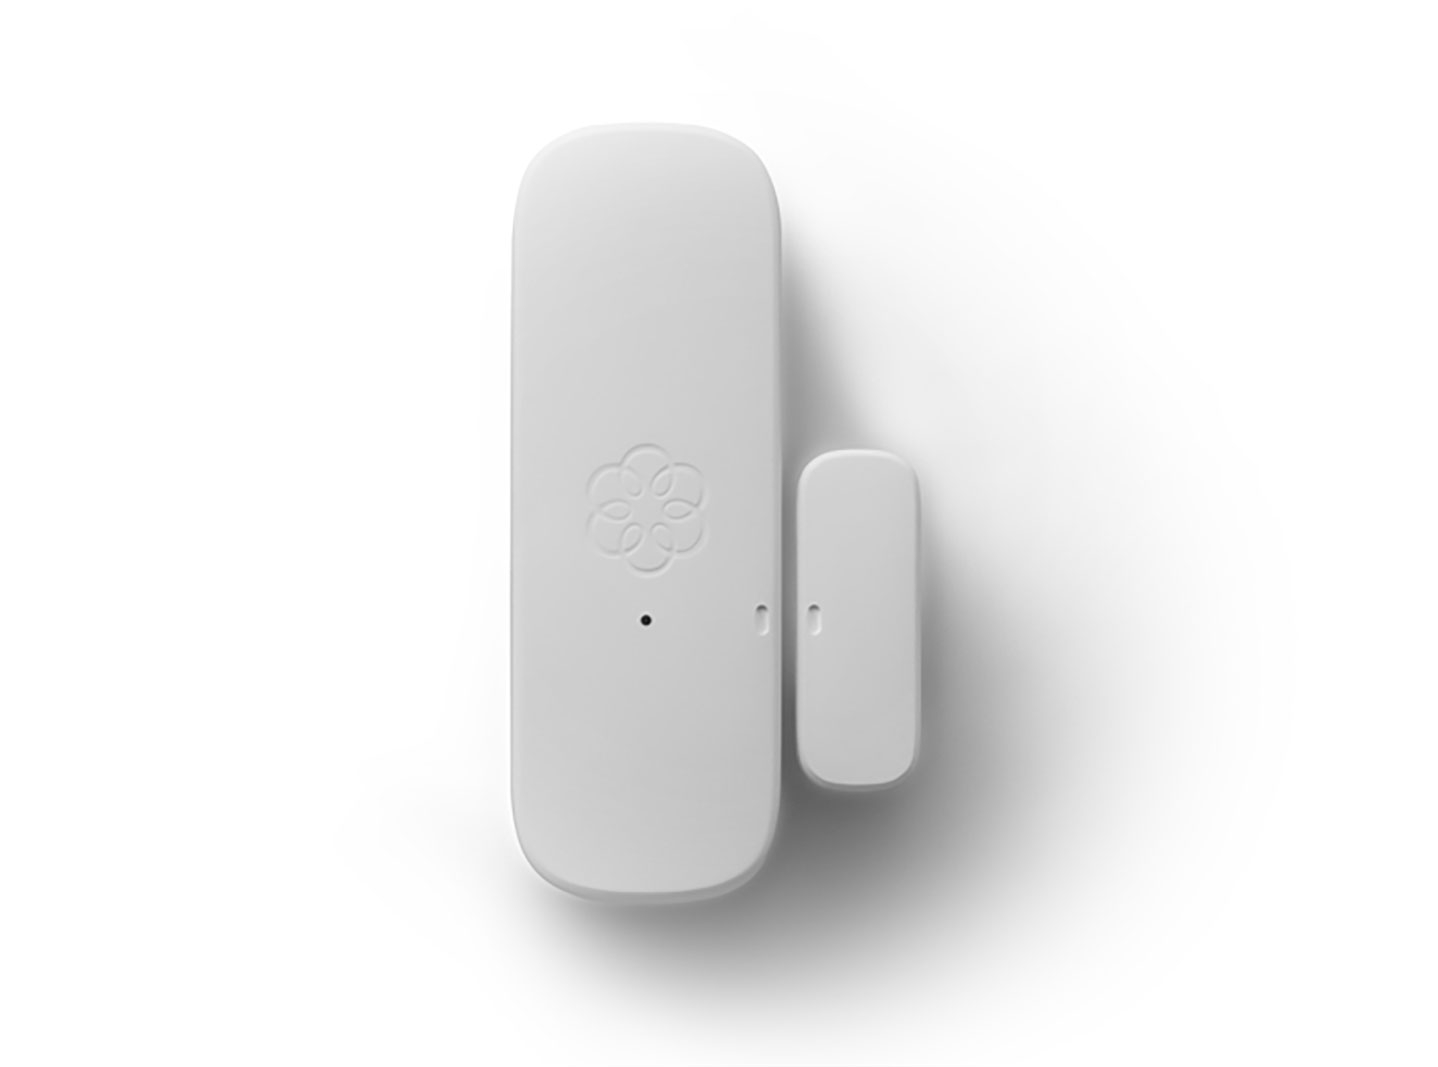 Door and window sensor used in home security with black and white backdrop.